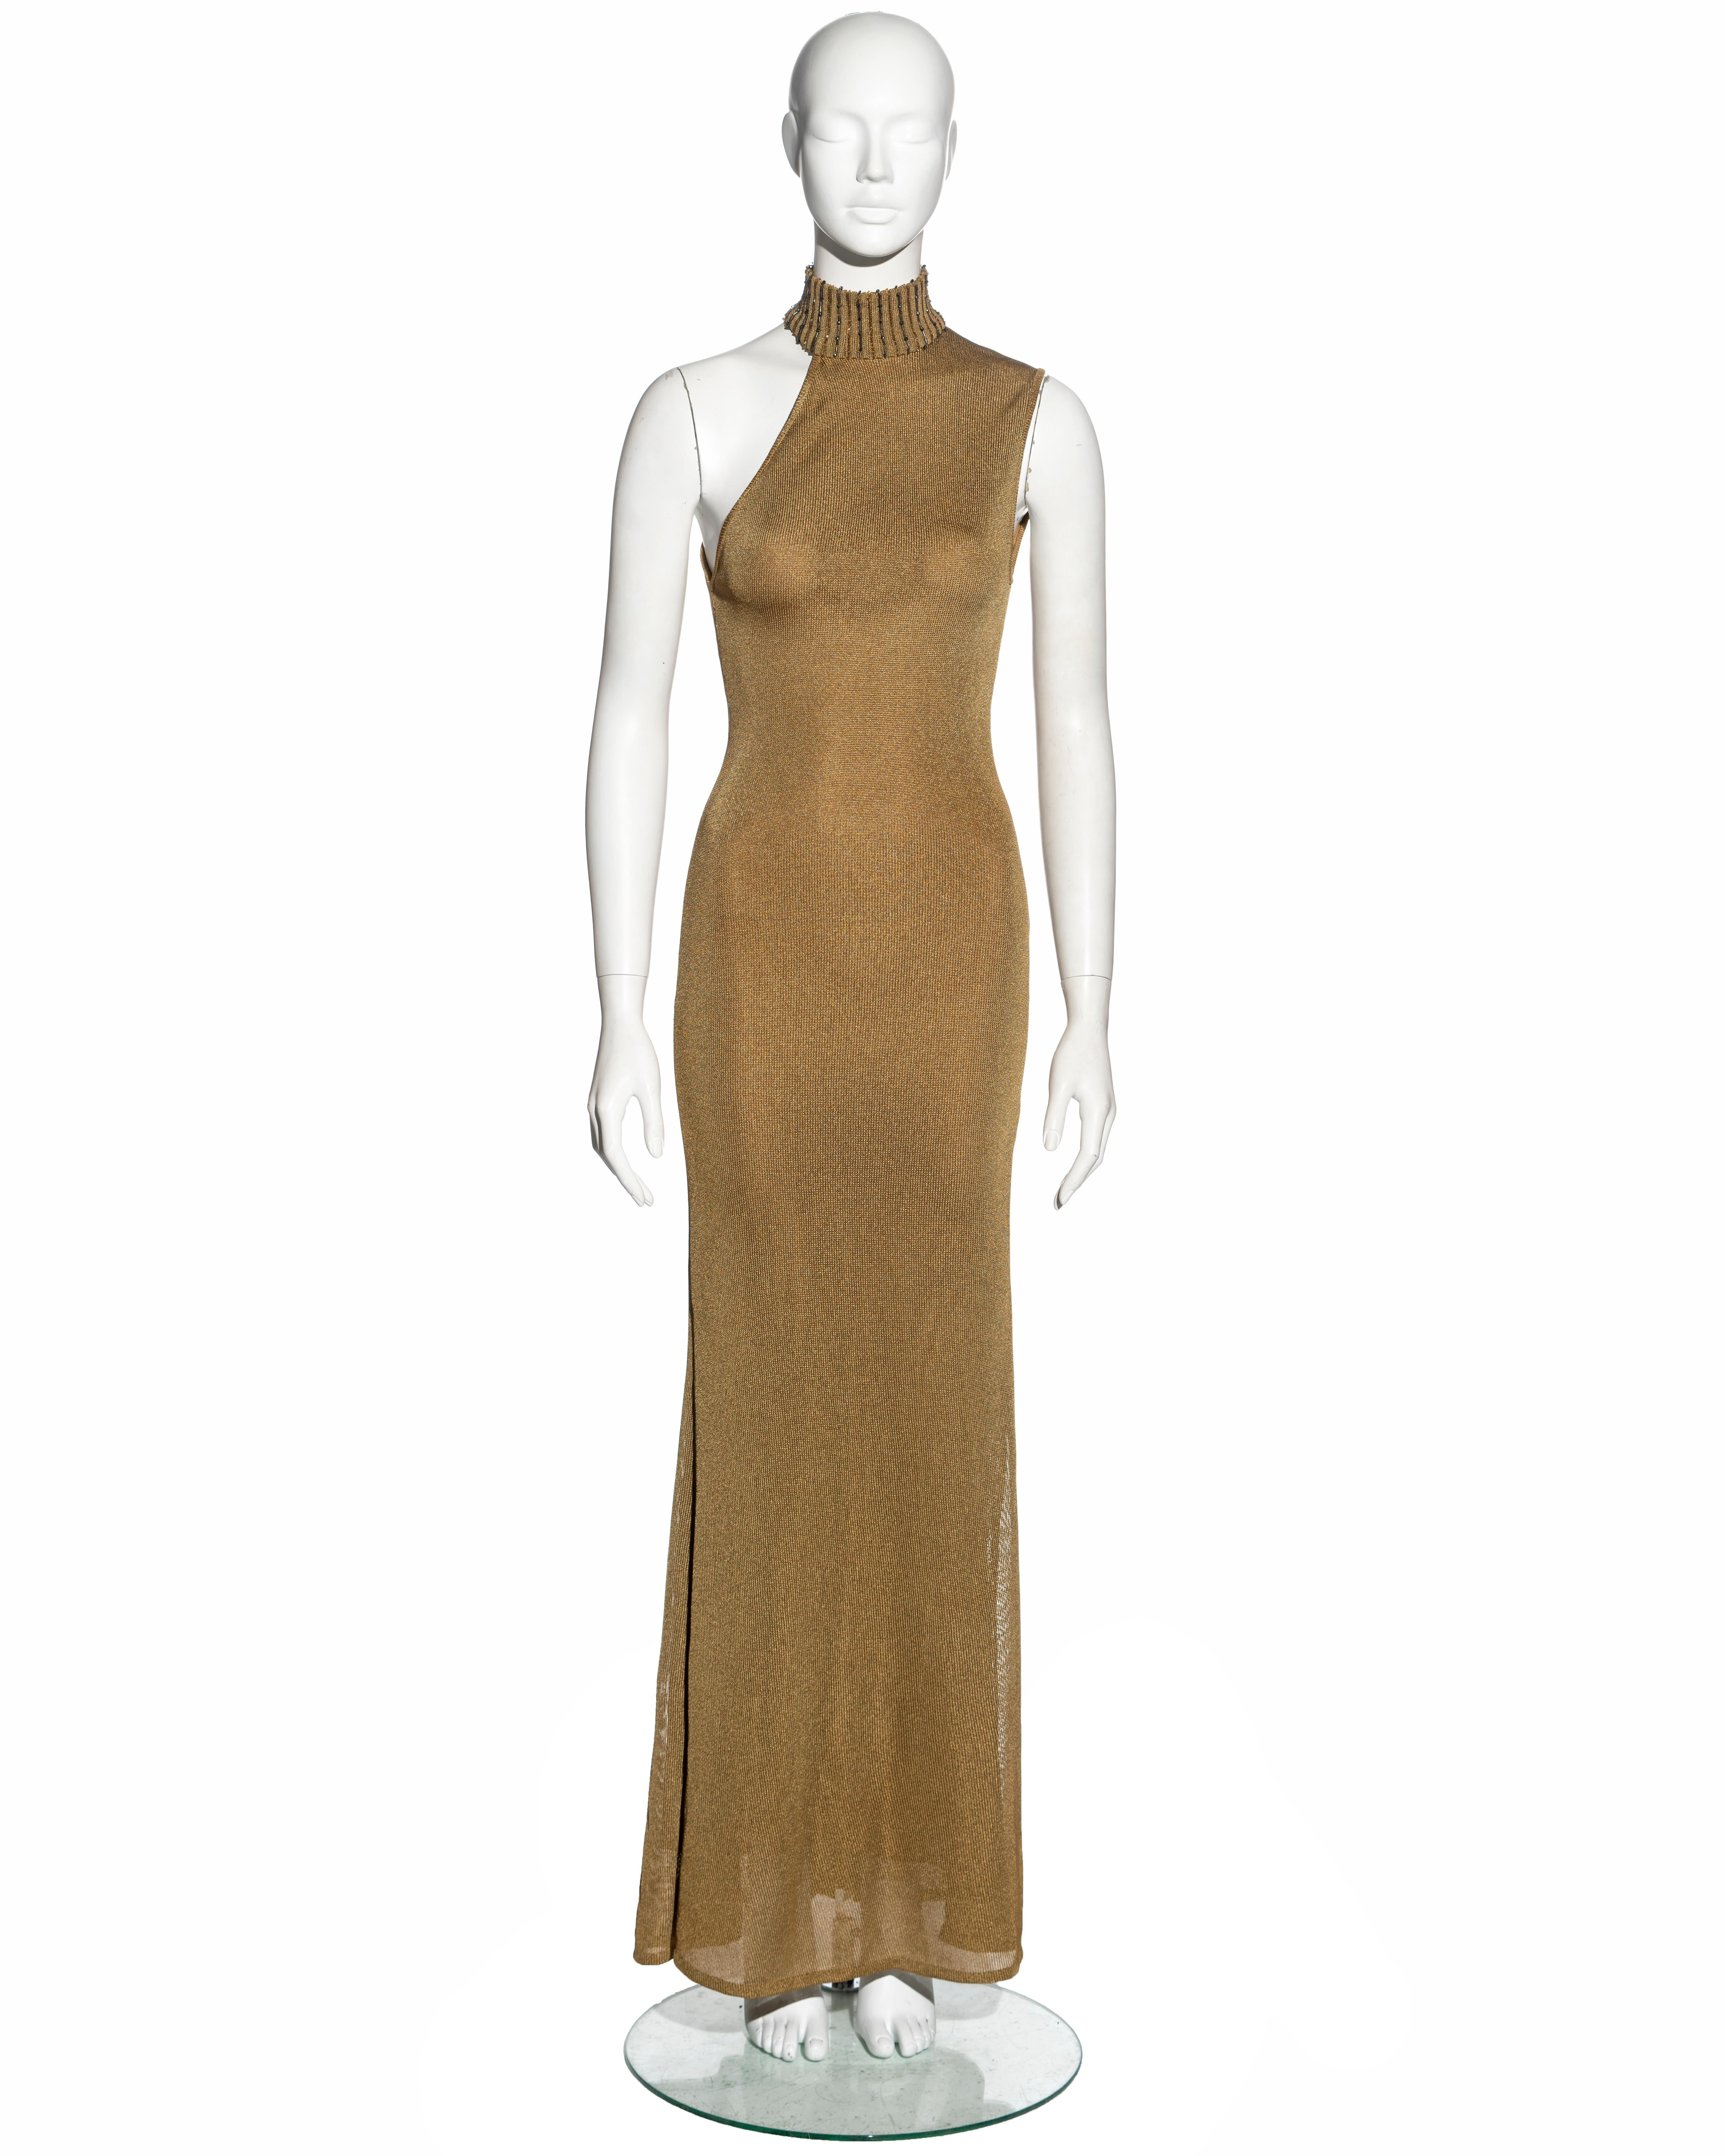 ▪ Gianni Versace evening dress
▪ Sold by One of a Kind Archive
▪ Constructed from gold knitted rayon
▪ Turtleneck with embellished with vertical rows of bugle beads
▪ Asymmetric neckline
▪ Floor-length skirt 
▪ Lined
▪ Fall-Winter 1996
▪ Size 38
▪